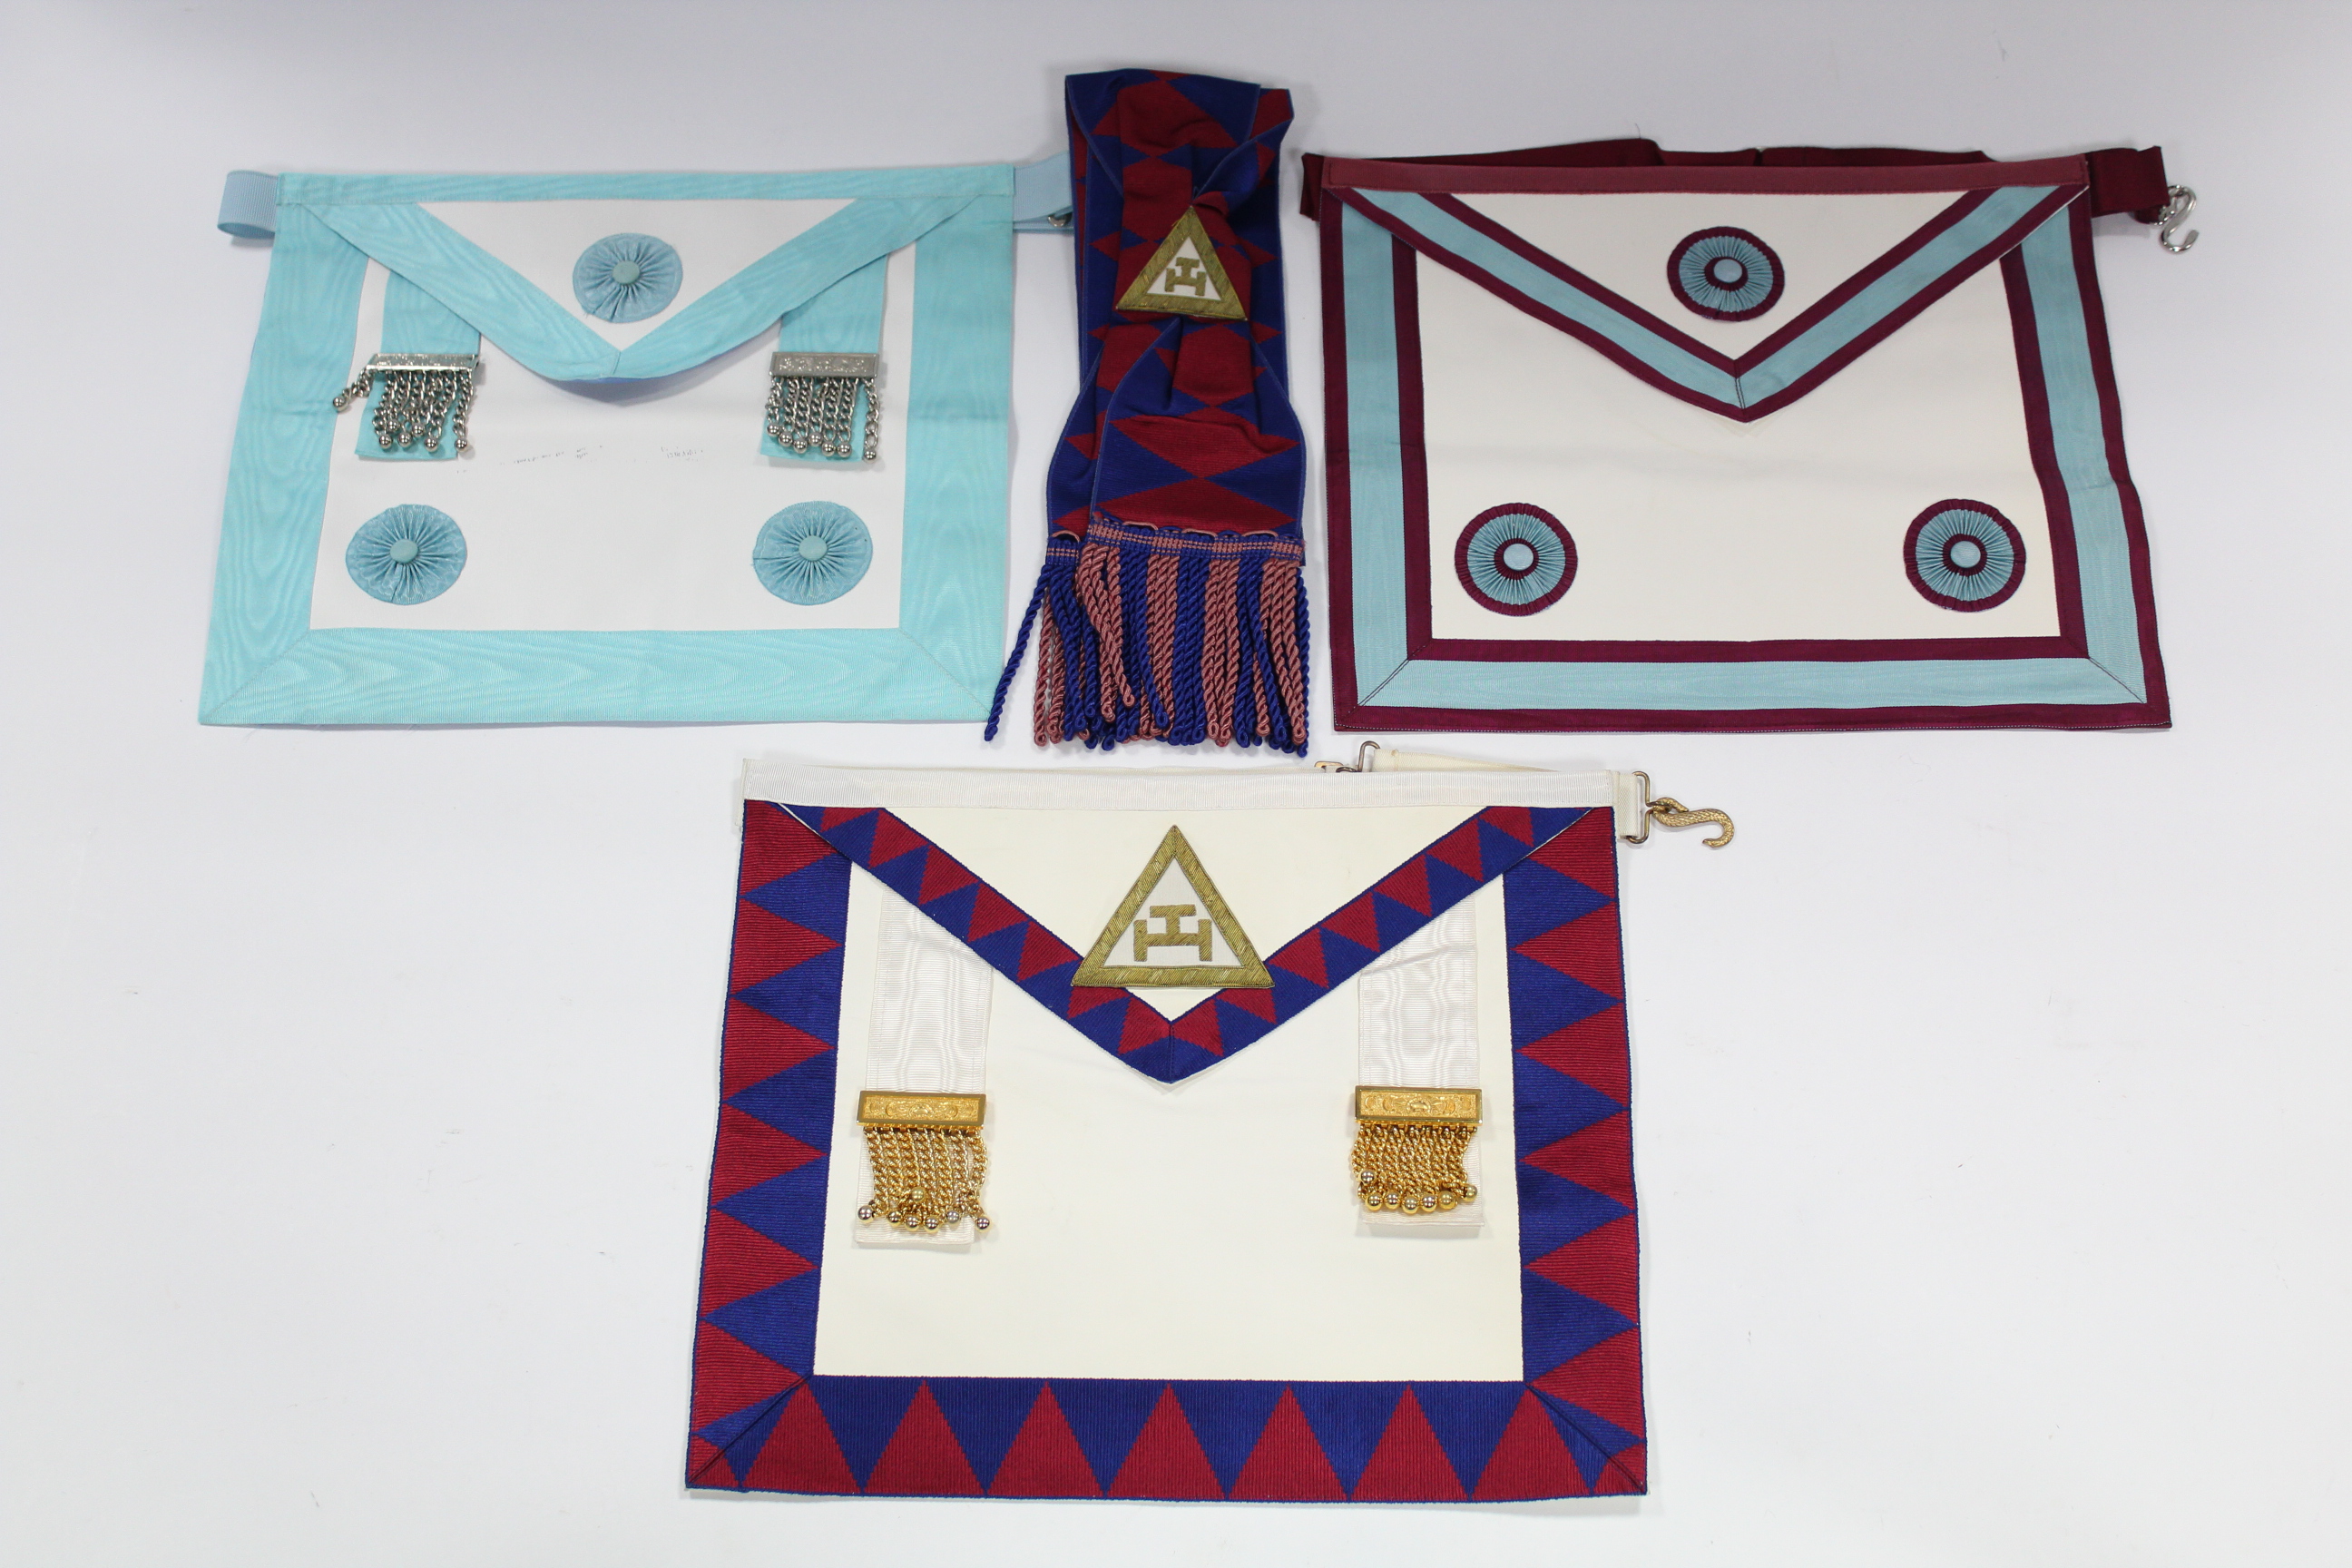 Four Masonic regalia medals; four ditto aprons; & various other Masonic regalia items, contained